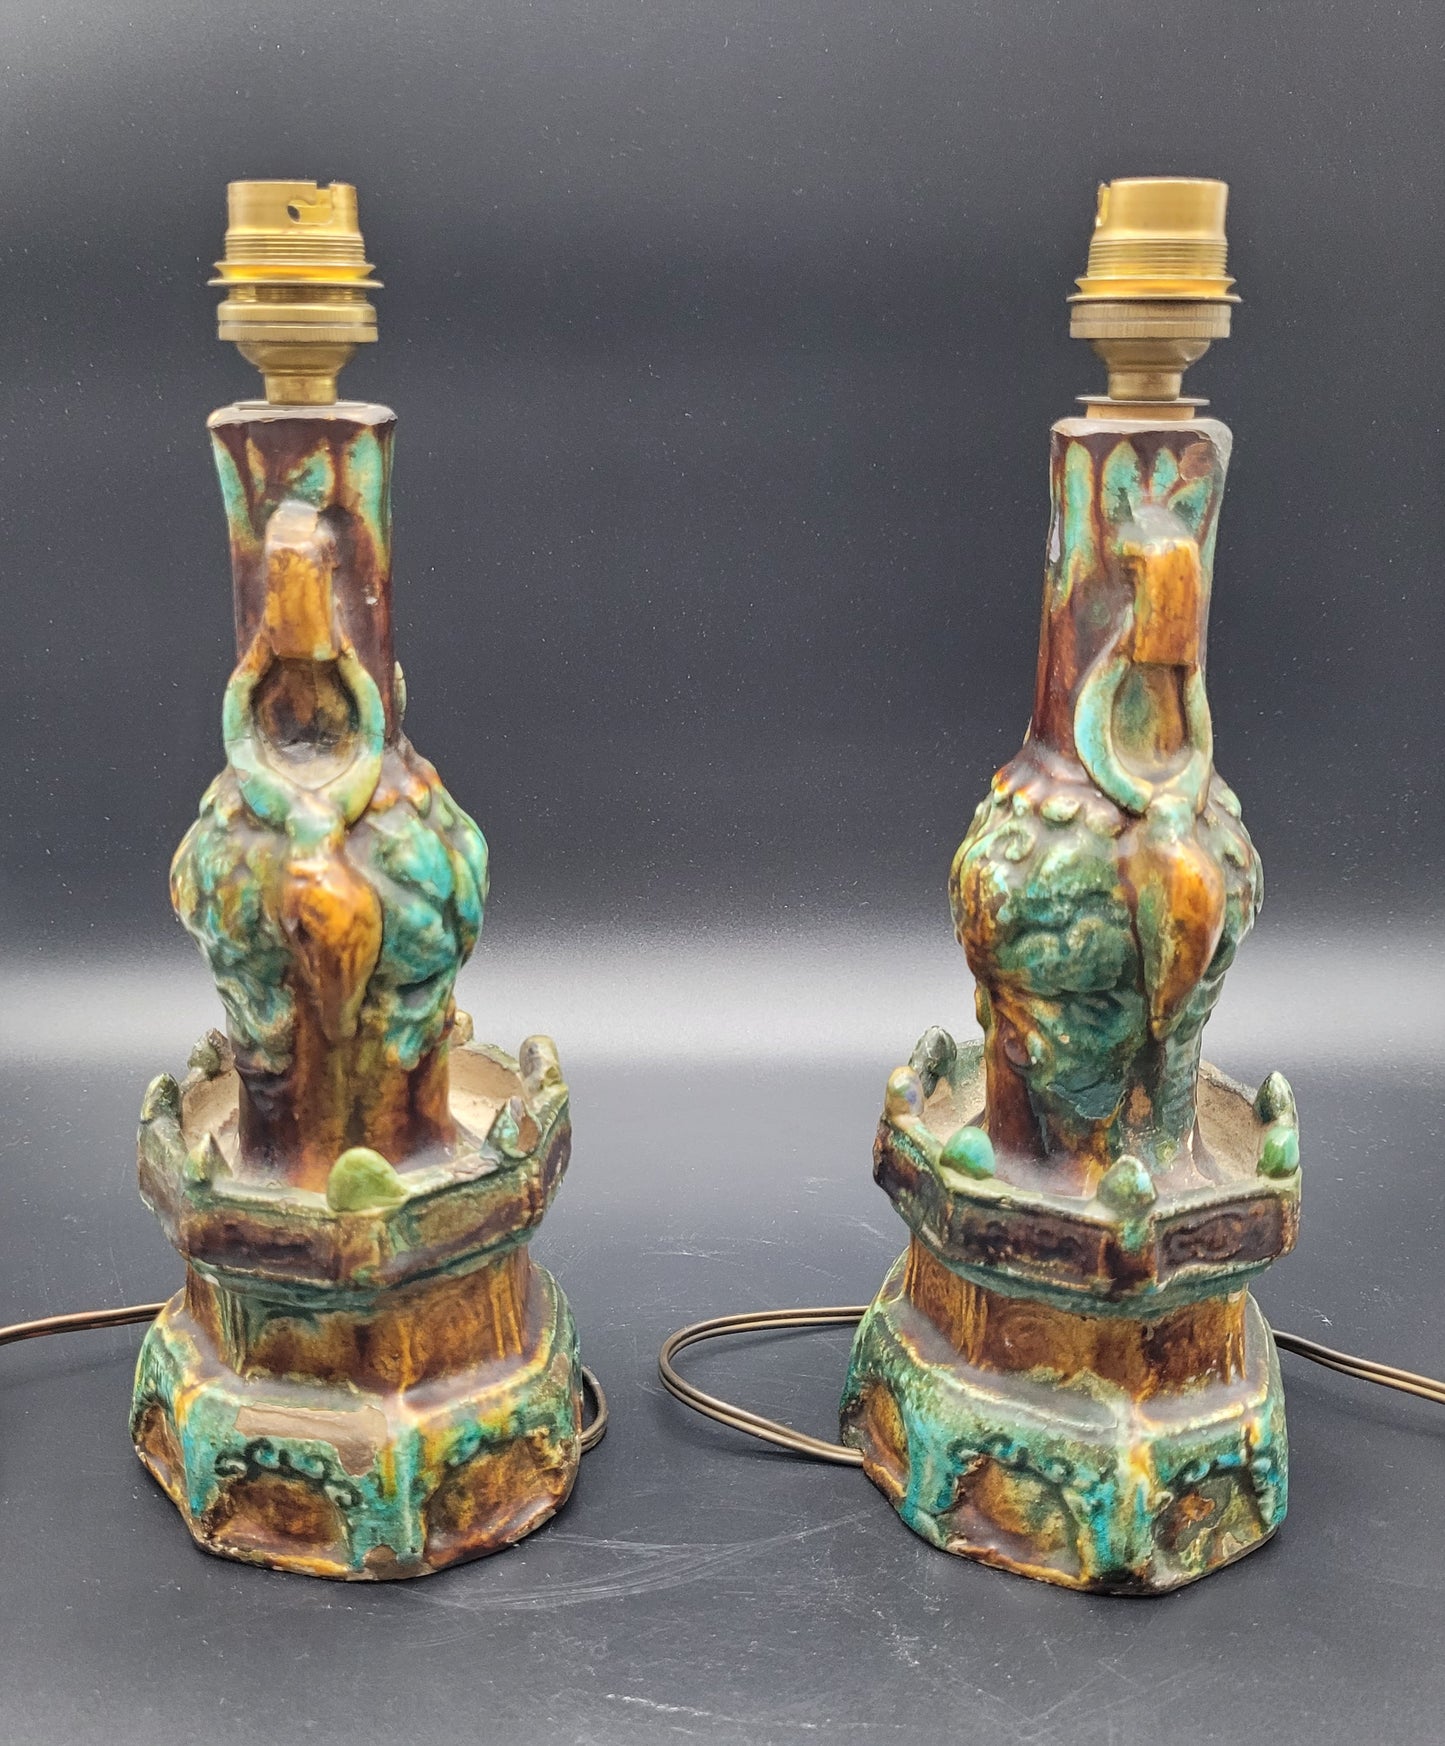 ANTIQUES & COLLECTABLES USA Chinese Ming Dynasty Pottery Candle Sticks 16th / 17th Century